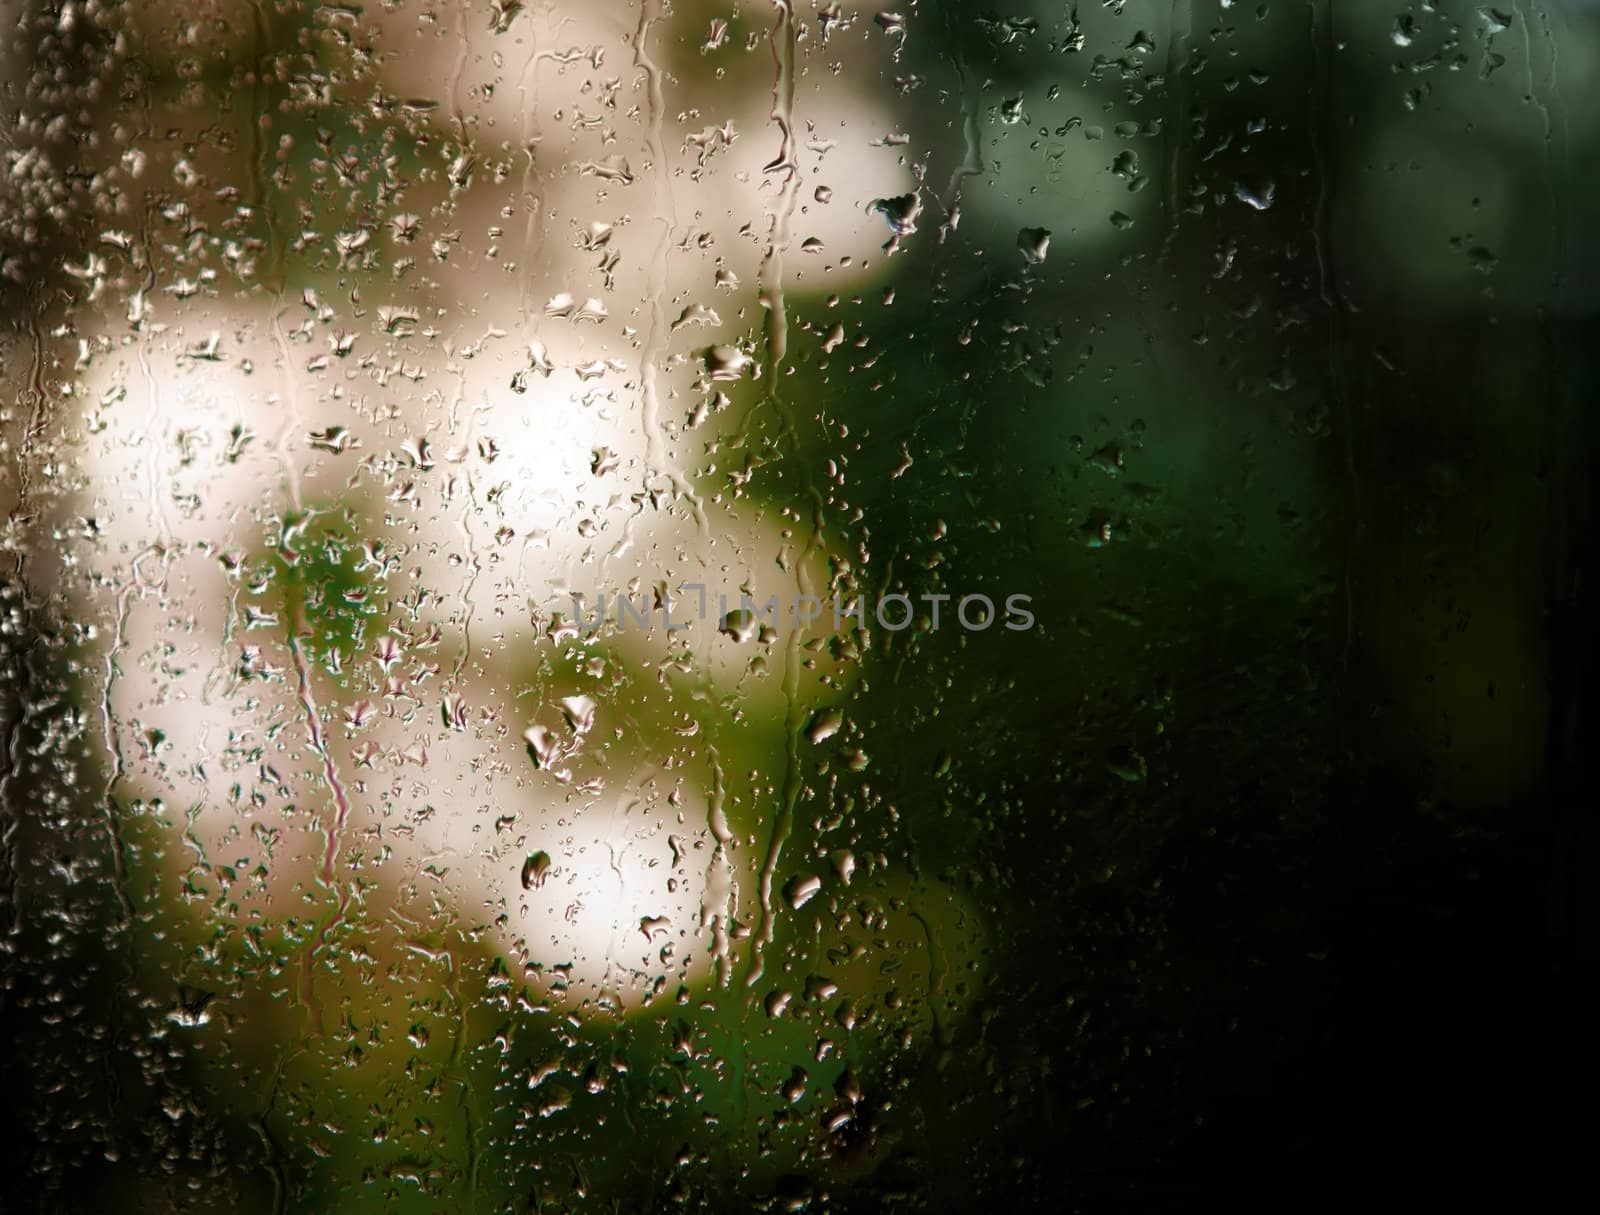 Background. Droplets and jets of water in bright light.